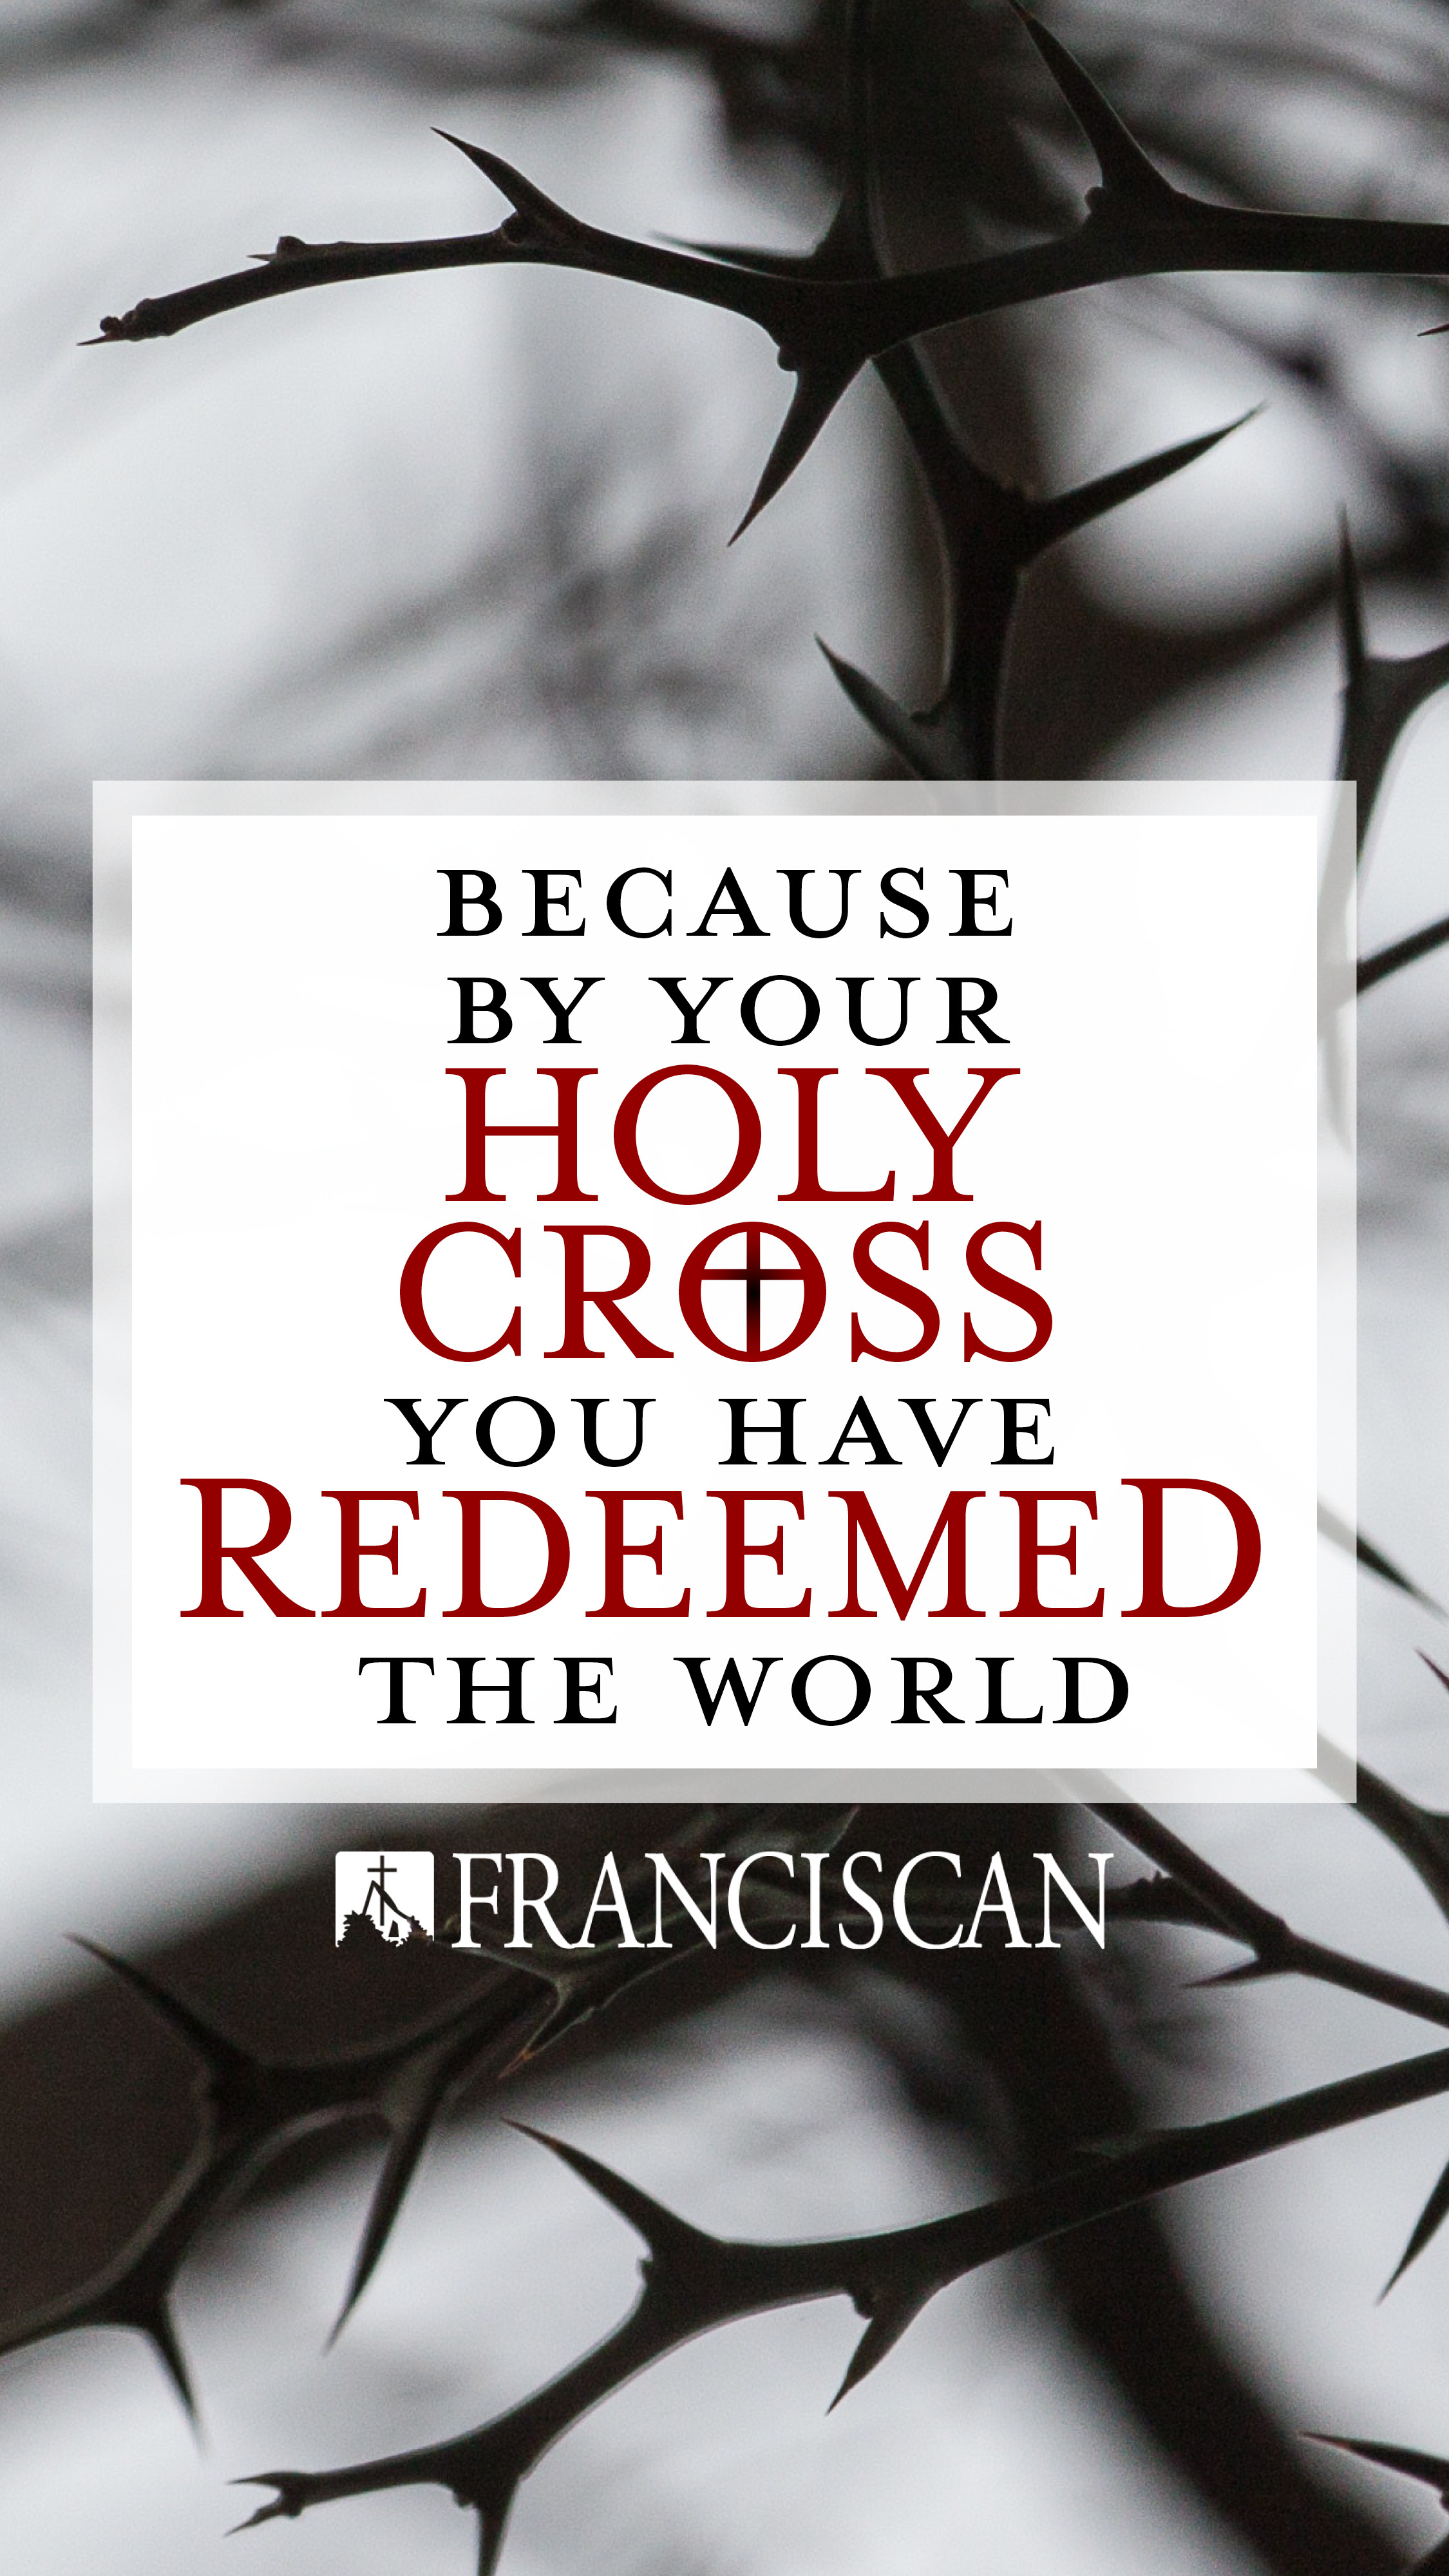 Becsuse By The Holy Cross You Have Redeemed The World - HD Wallpaper 